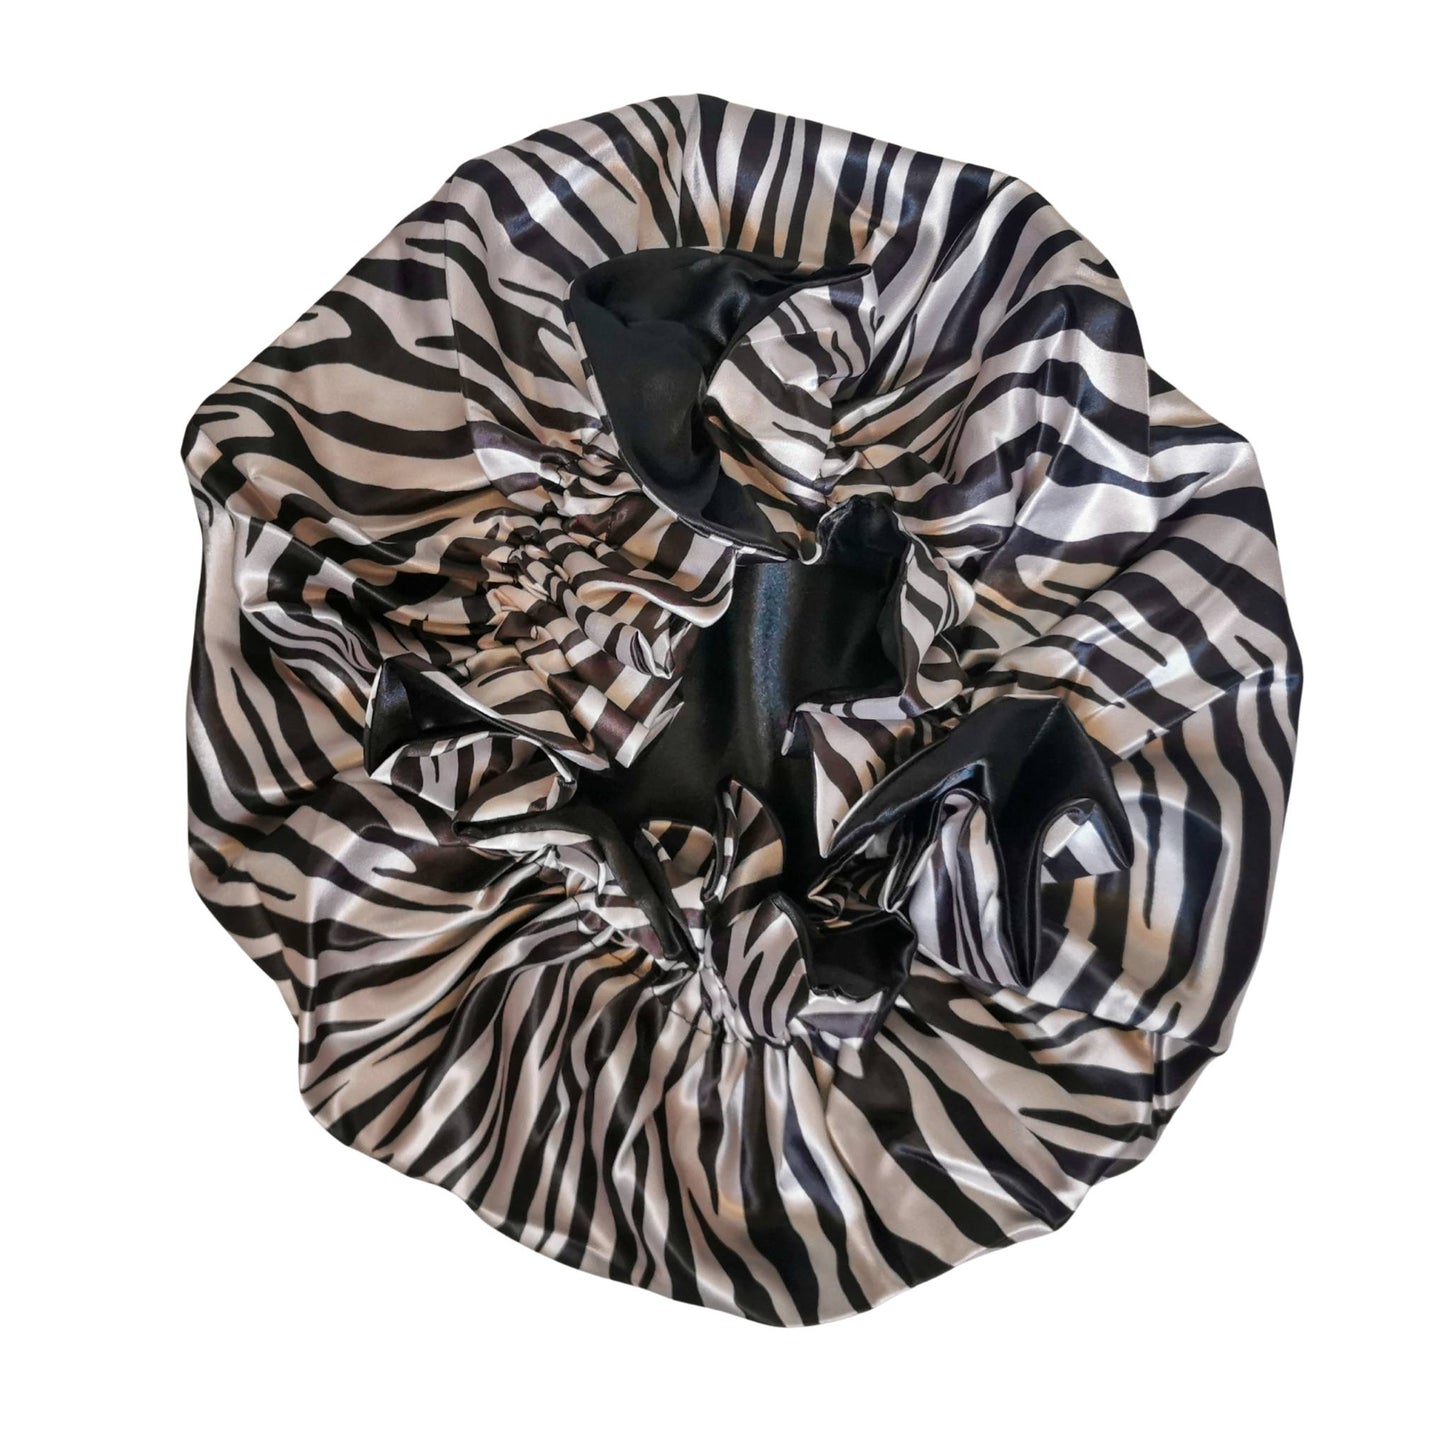 zebra print satin bonnet with frill finish and black lining - lining view